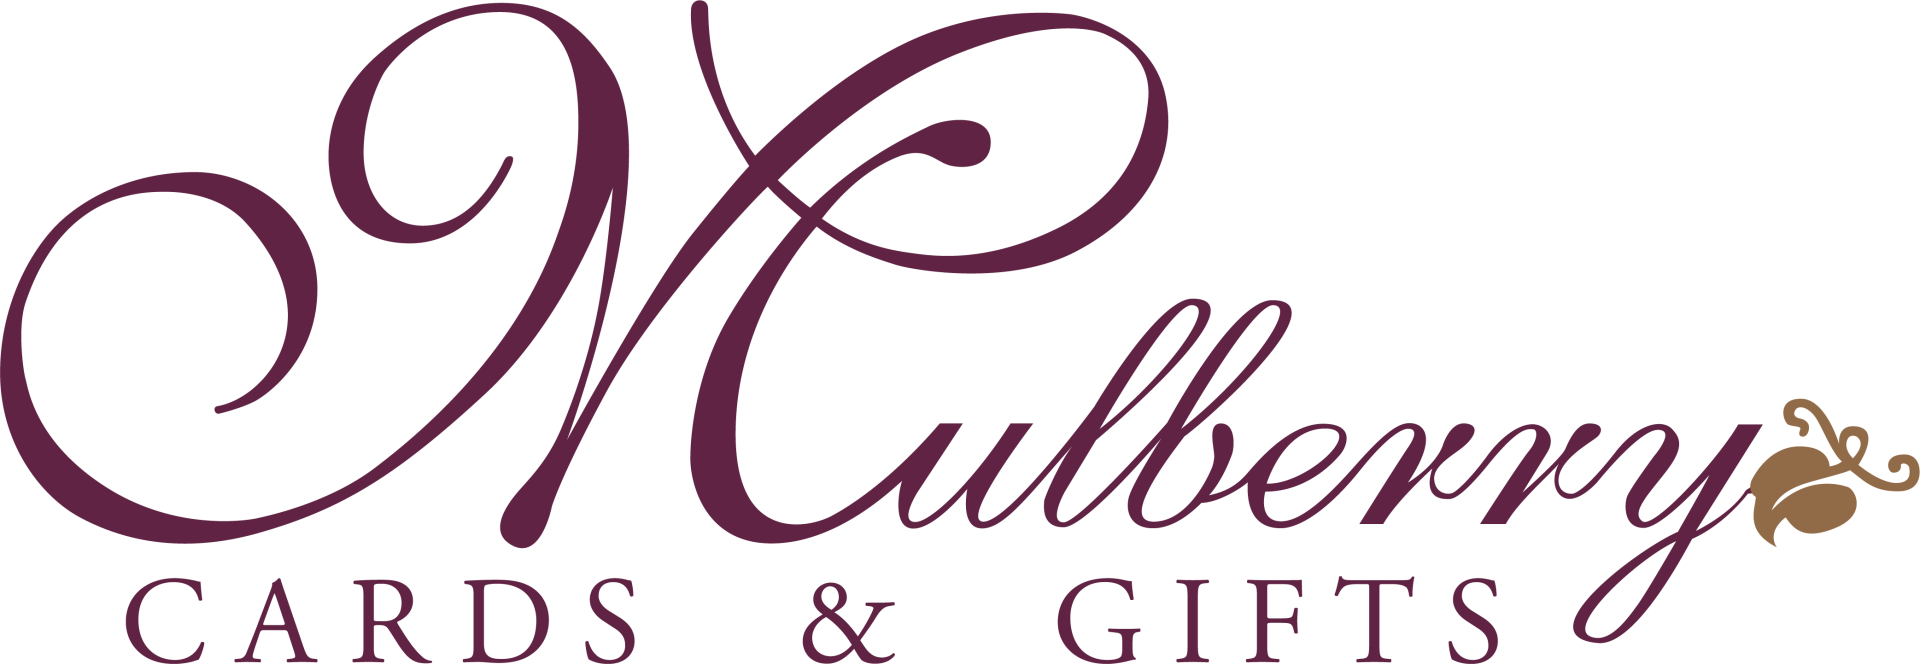 Mulberry Cards & Gifts